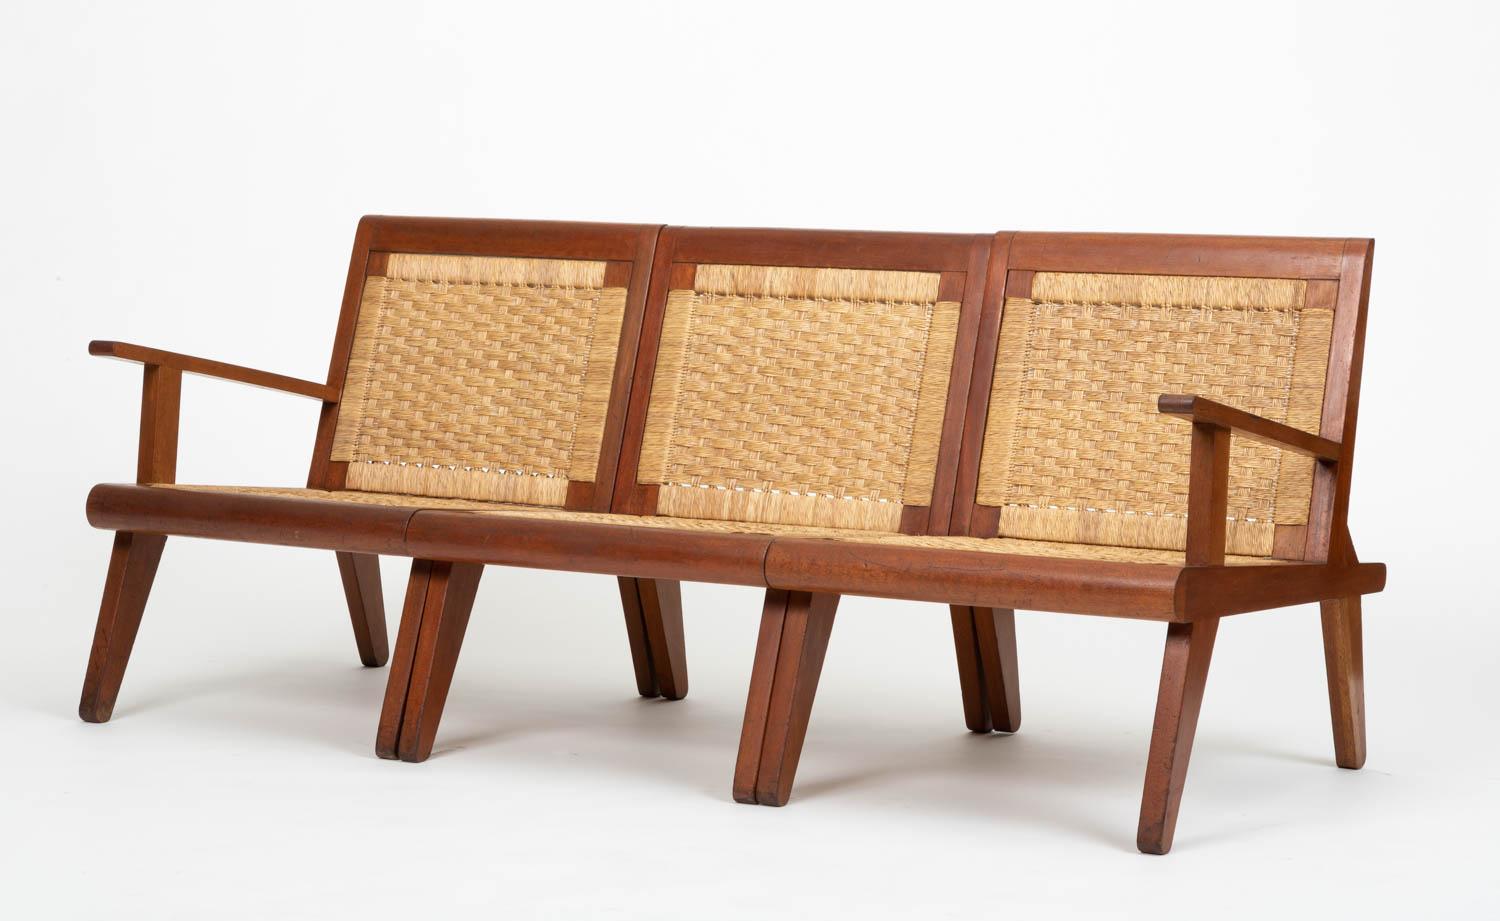 Bauhaus-trained, Mexico city based Michael van Beuren created highly functional modern design inspired by Mexican vernacular styles and materials. This example is a modular sofa/lounge chair with a teak frame. The back and seat are strung with